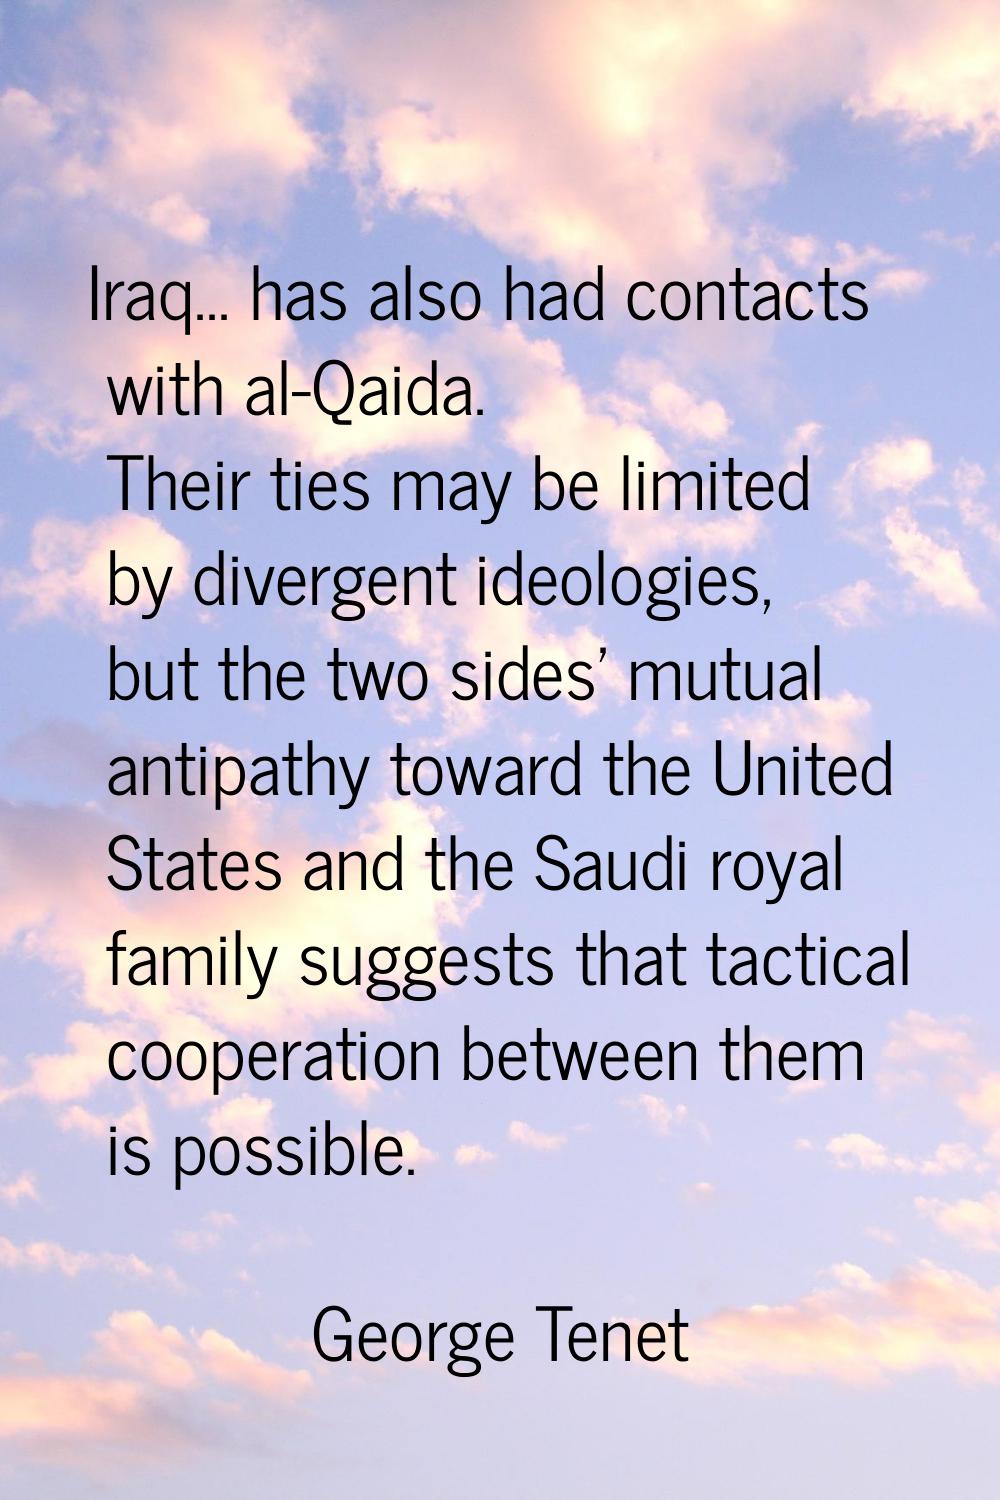 Iraq... has also had contacts with al-Qaida. Their ties may be limited by divergent ideologies, but